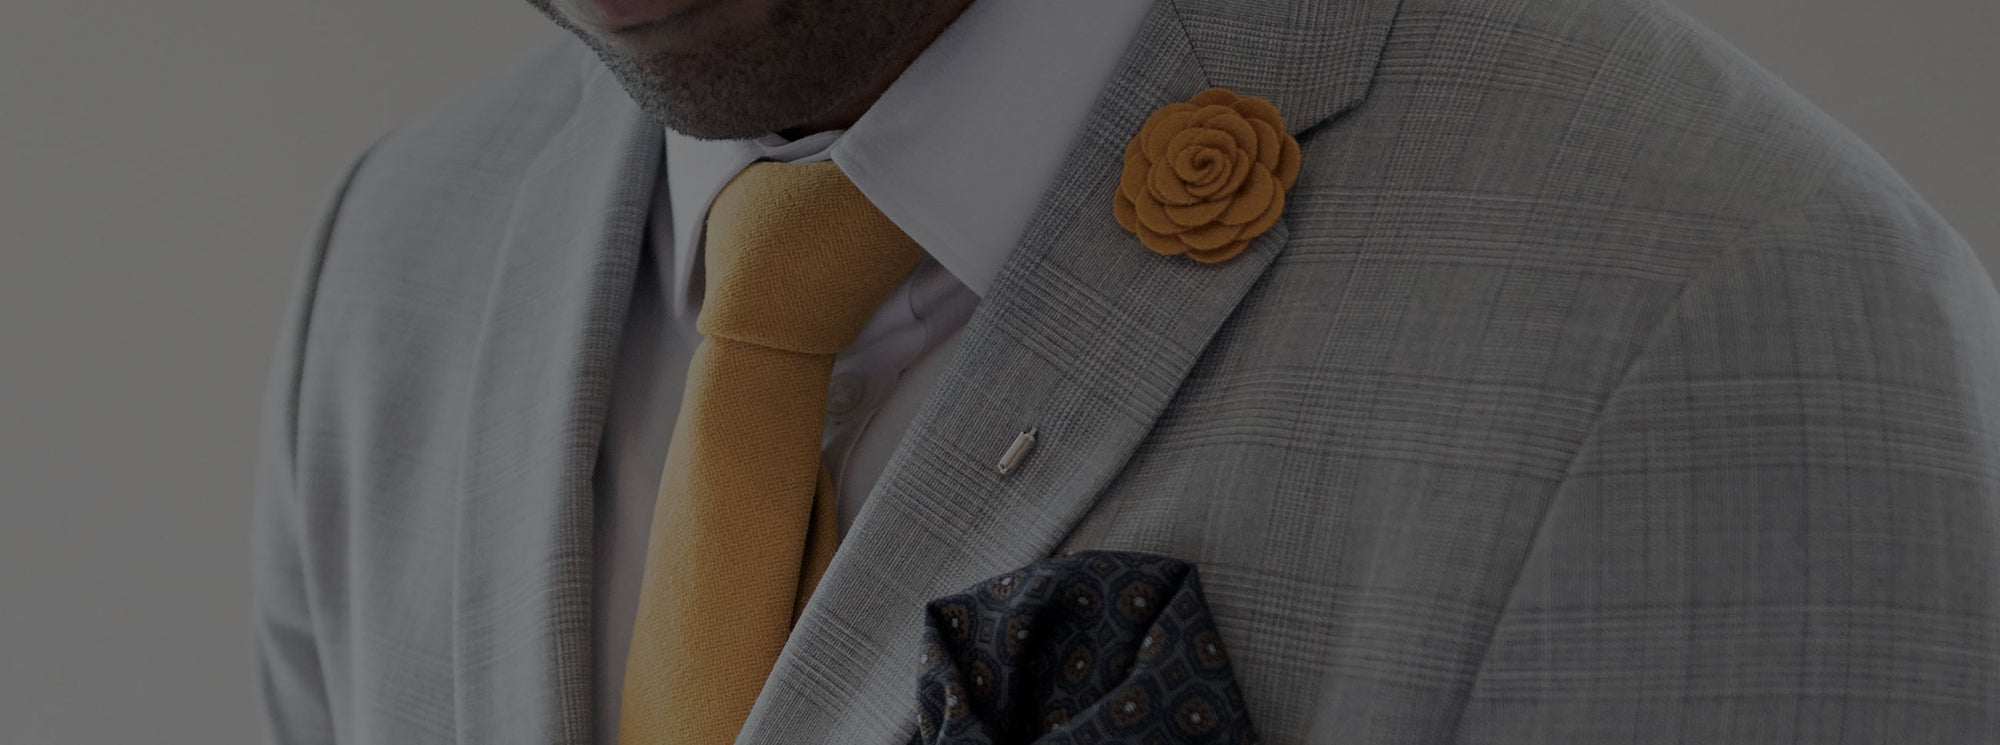 Light Grey suit with a yellow lapel pin